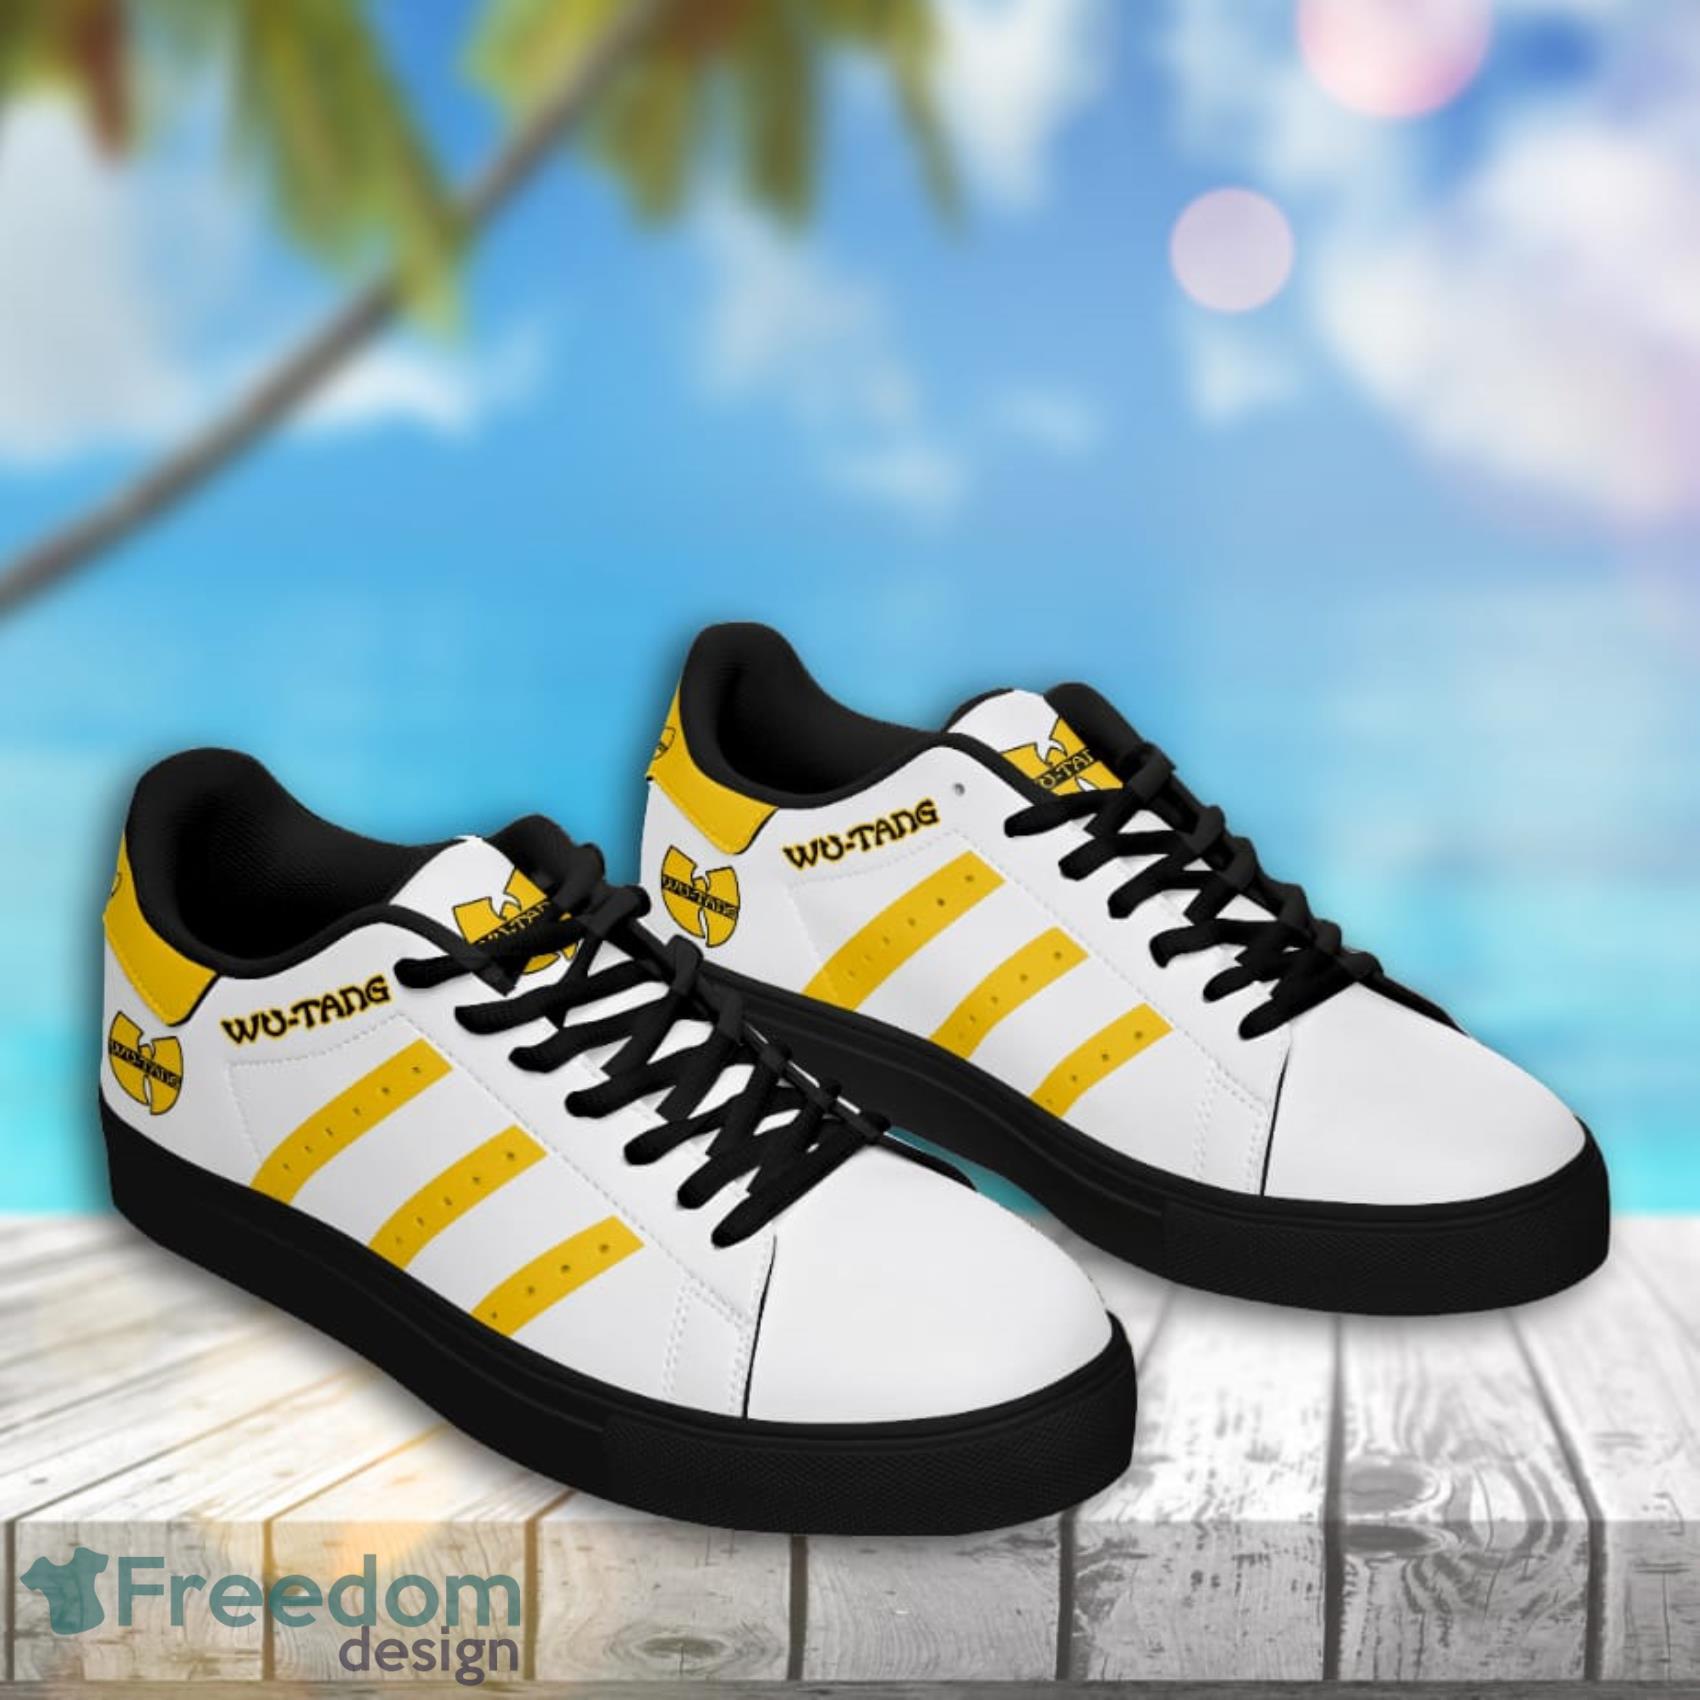 contact Lol Transistor Wu Tang Clan Hip Hop Band 4k422 AOP Print Low Top Leather Skate Shoes -  Freedomdesign